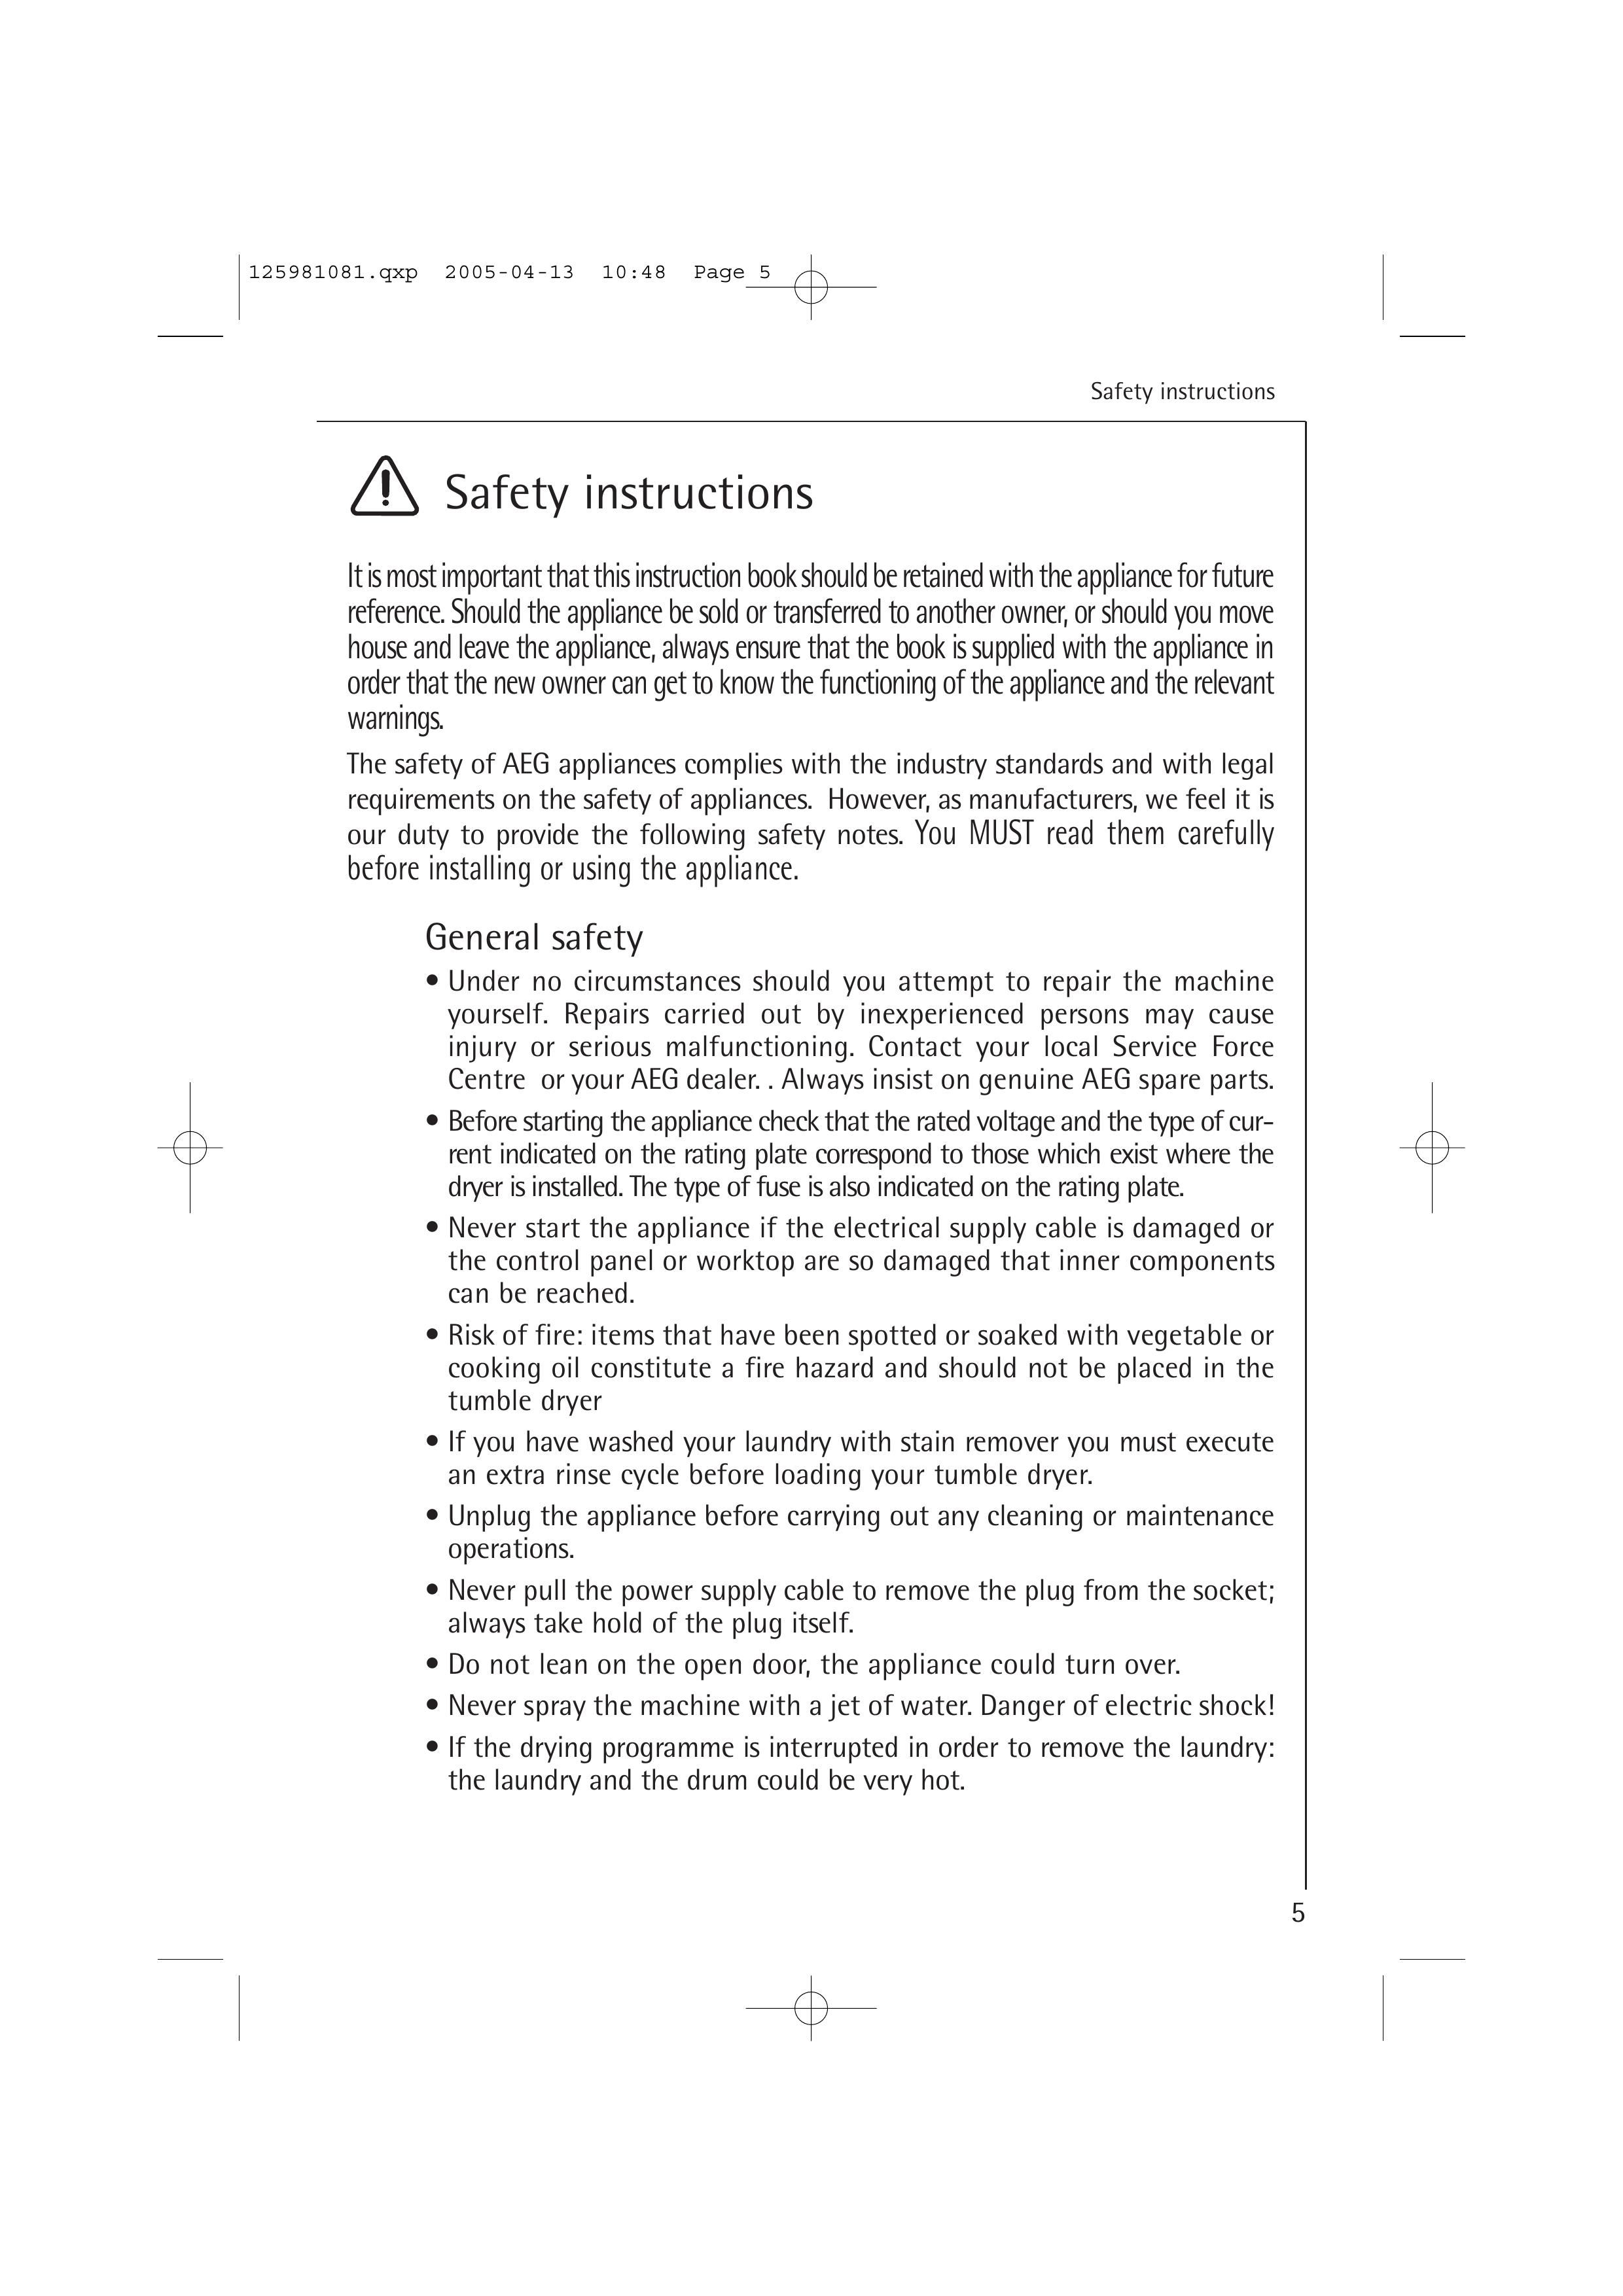 AEG T37400 Clothes Dryer User Manual (Page 5)